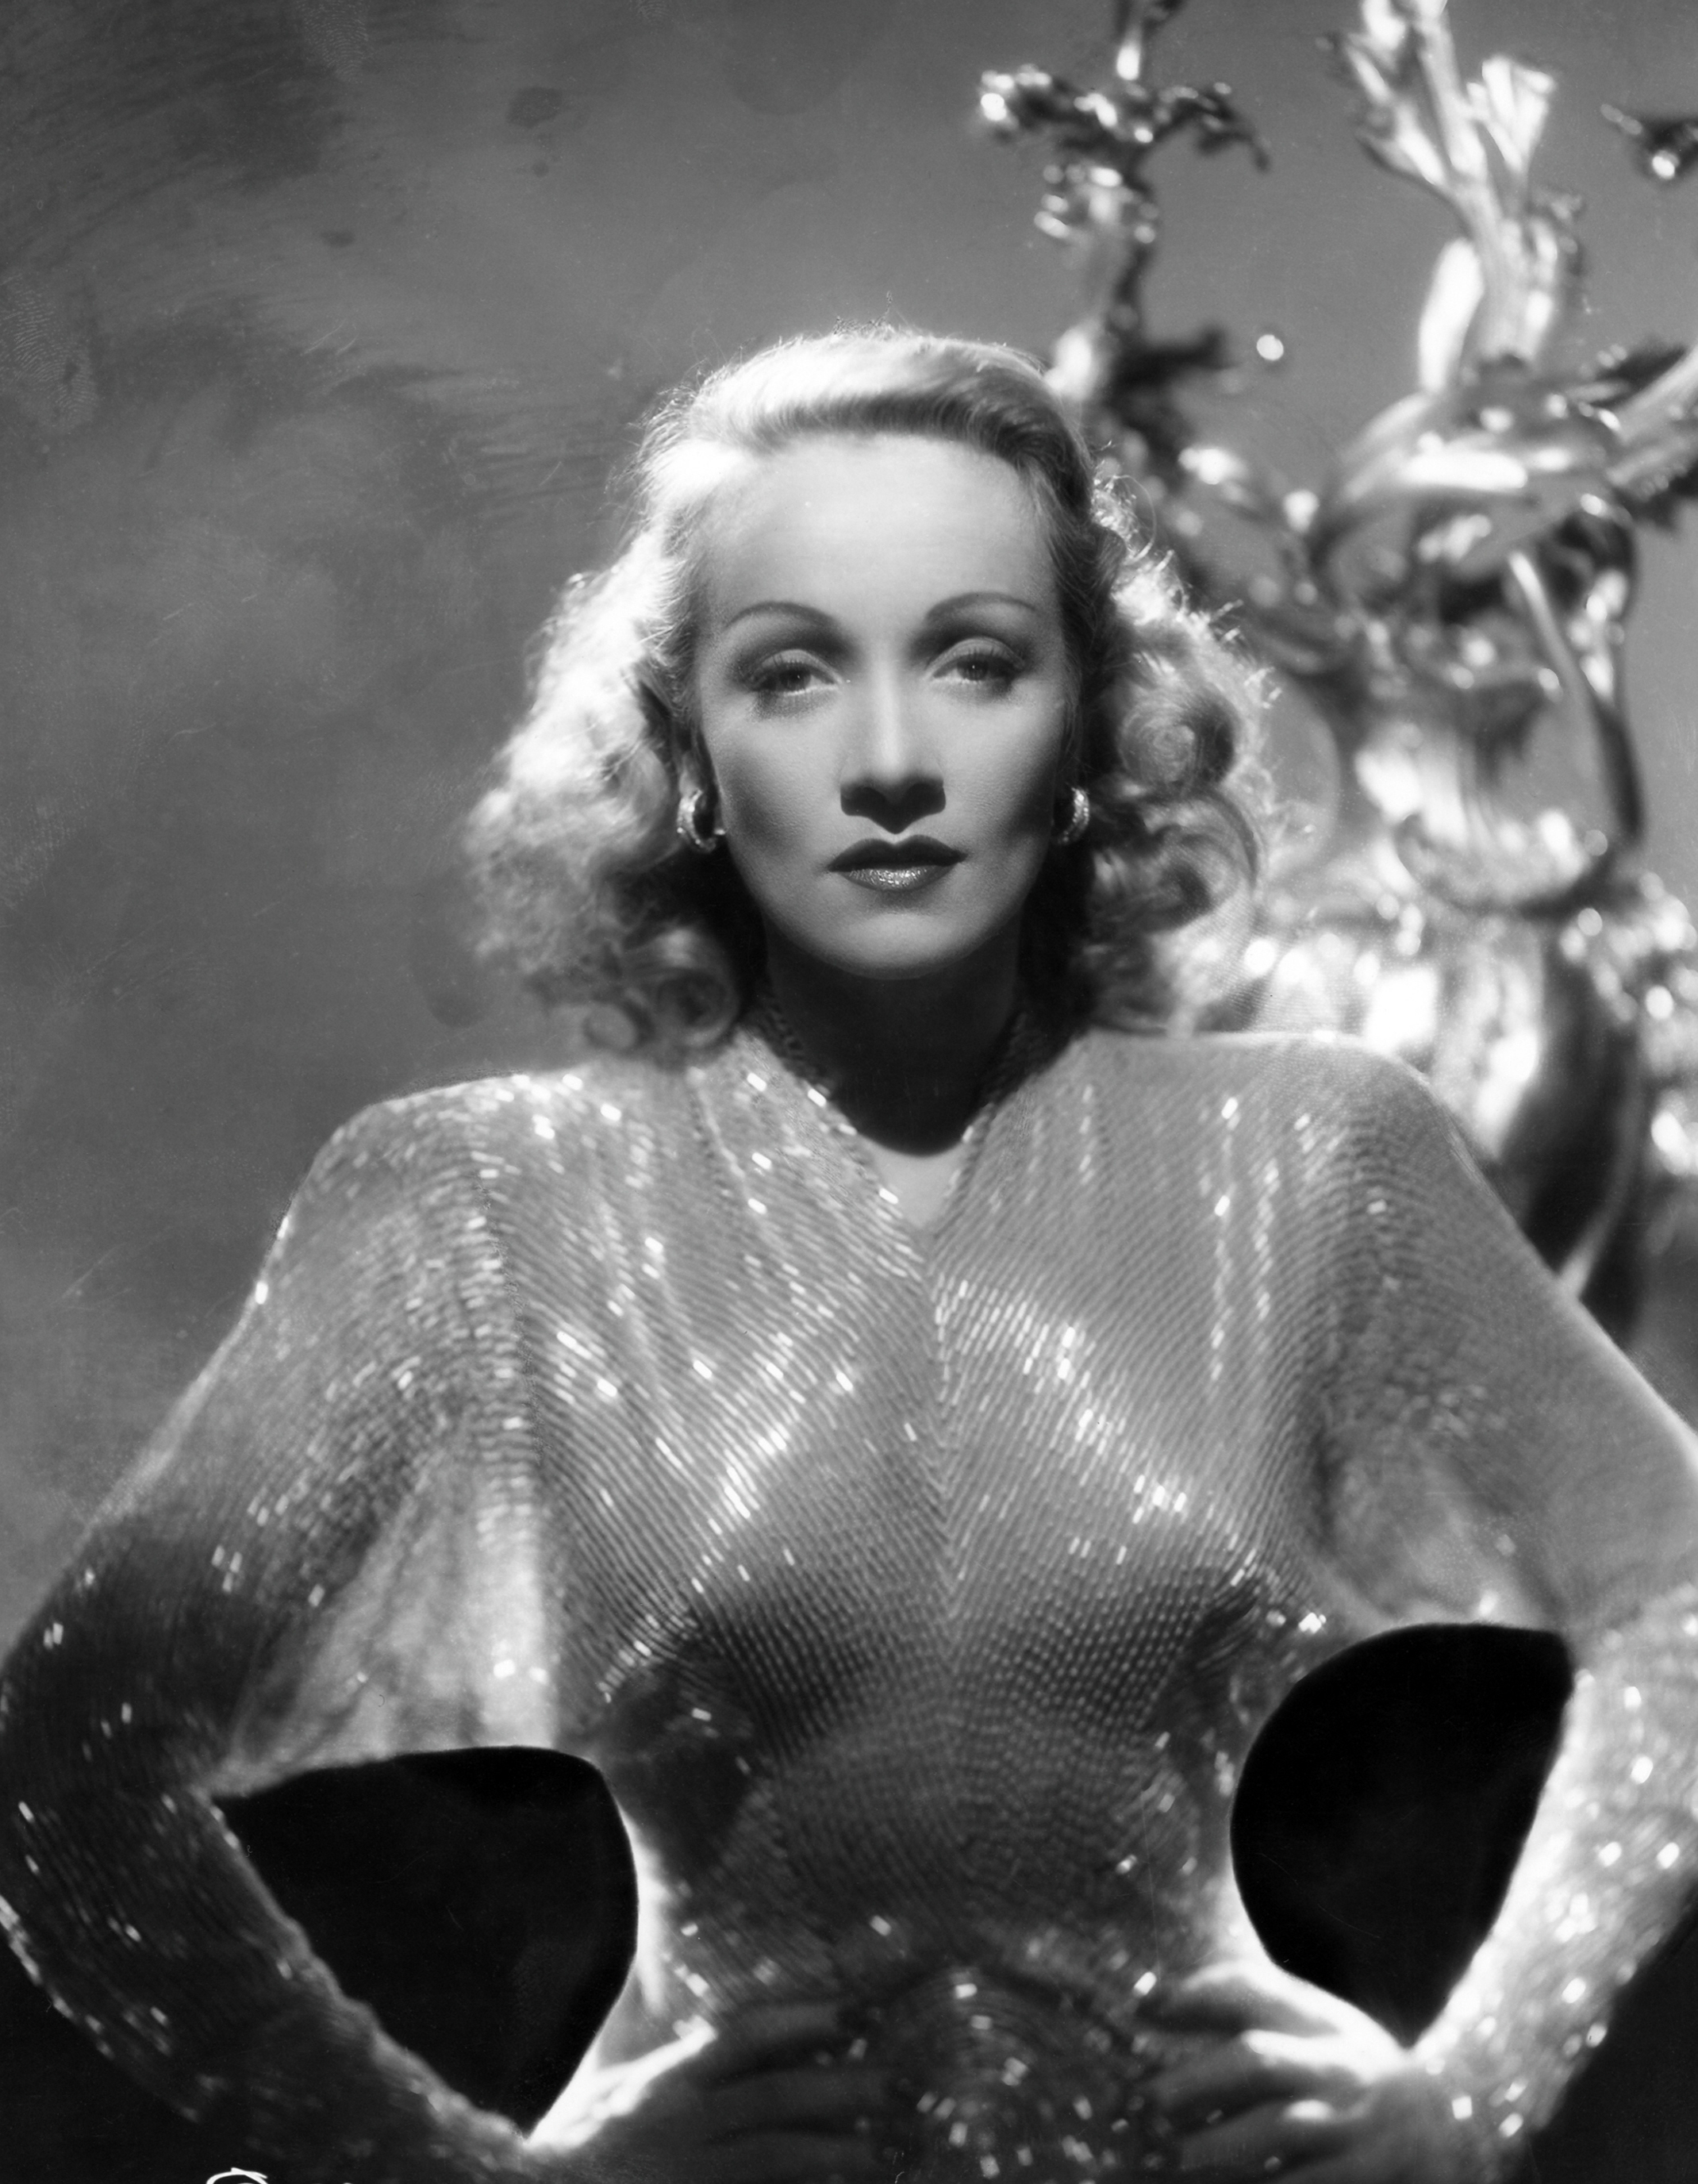 Marlene Dietrich Archives – Silver Screen Modes by Christian Esquevin